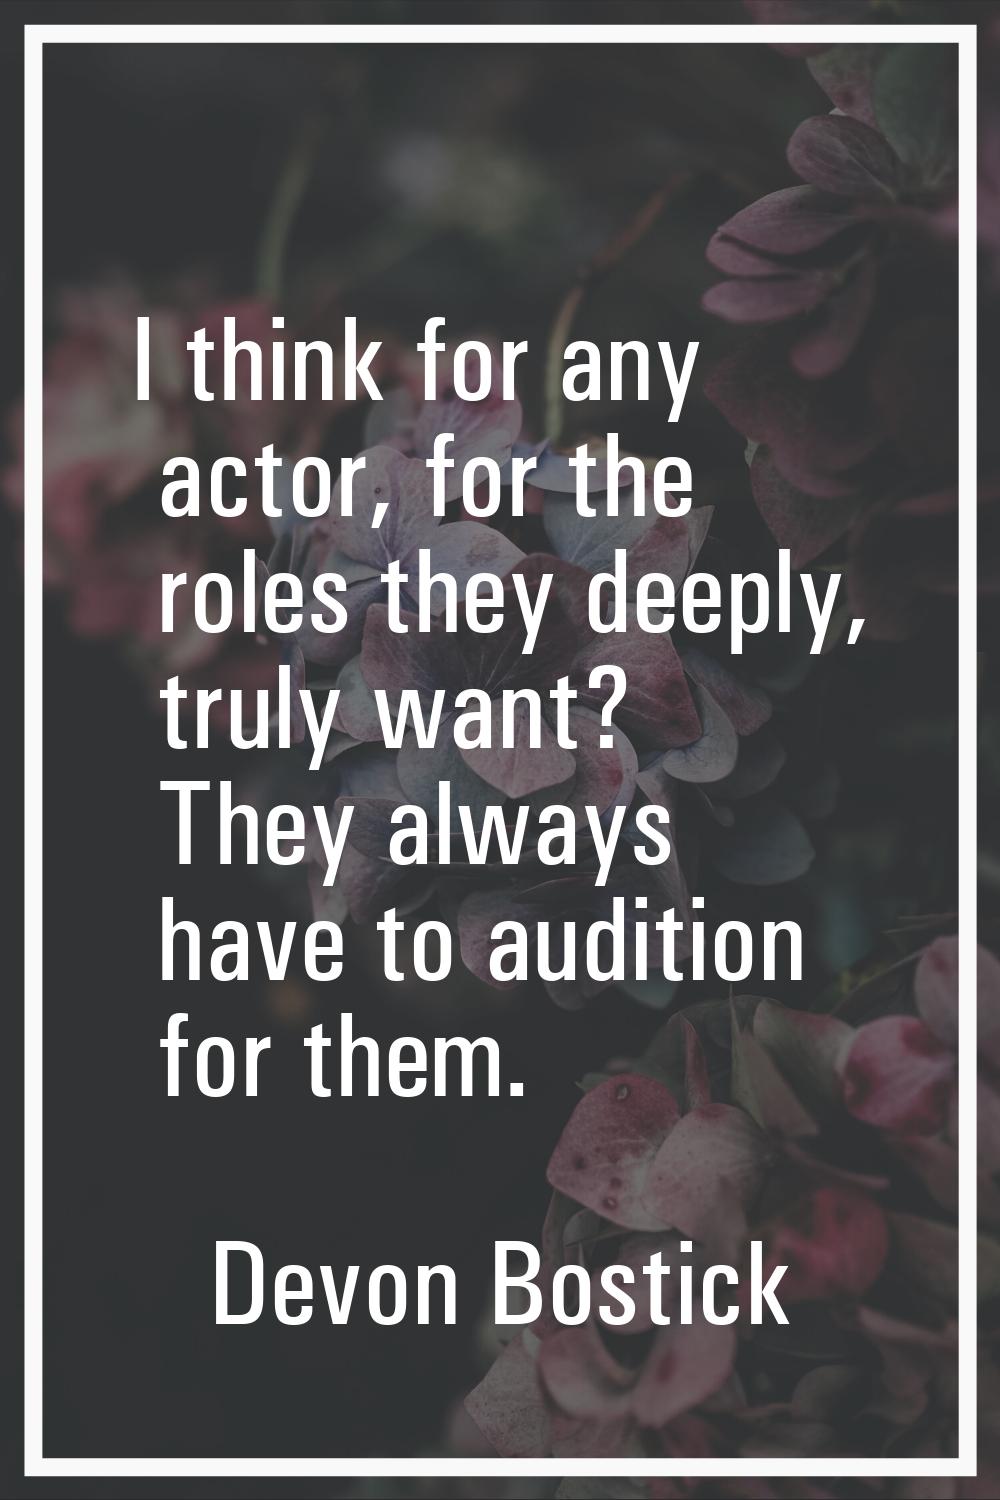 I think for any actor, for the roles they deeply, truly want? They always have to audition for them